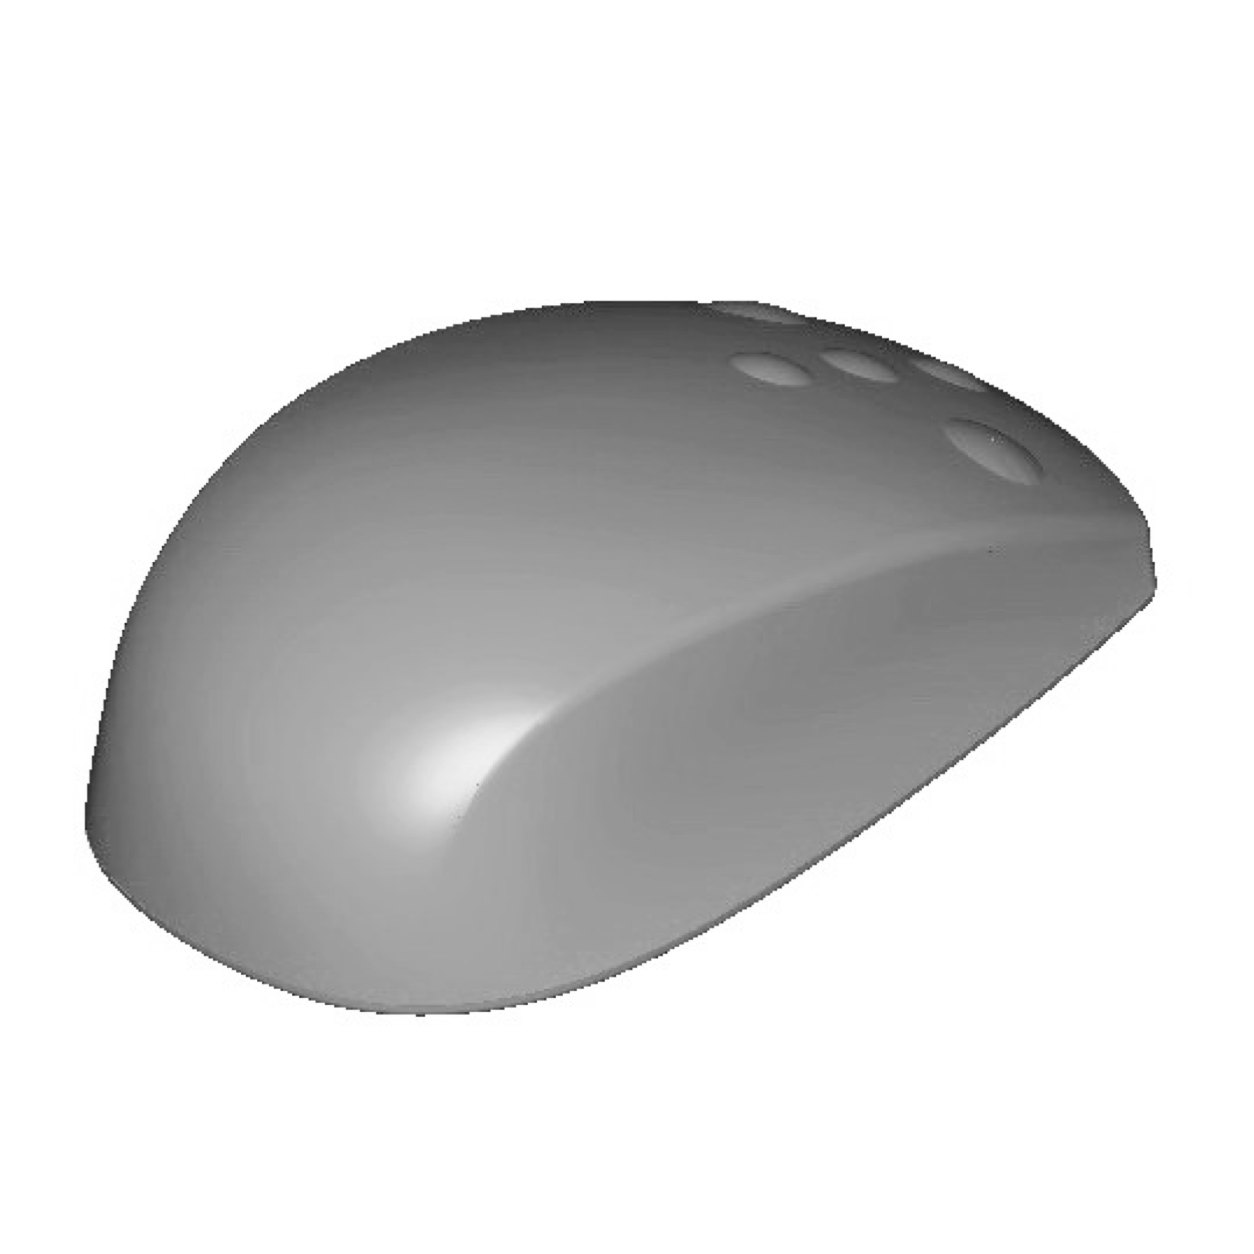 AS-M033 Waterproof Optical Mouse